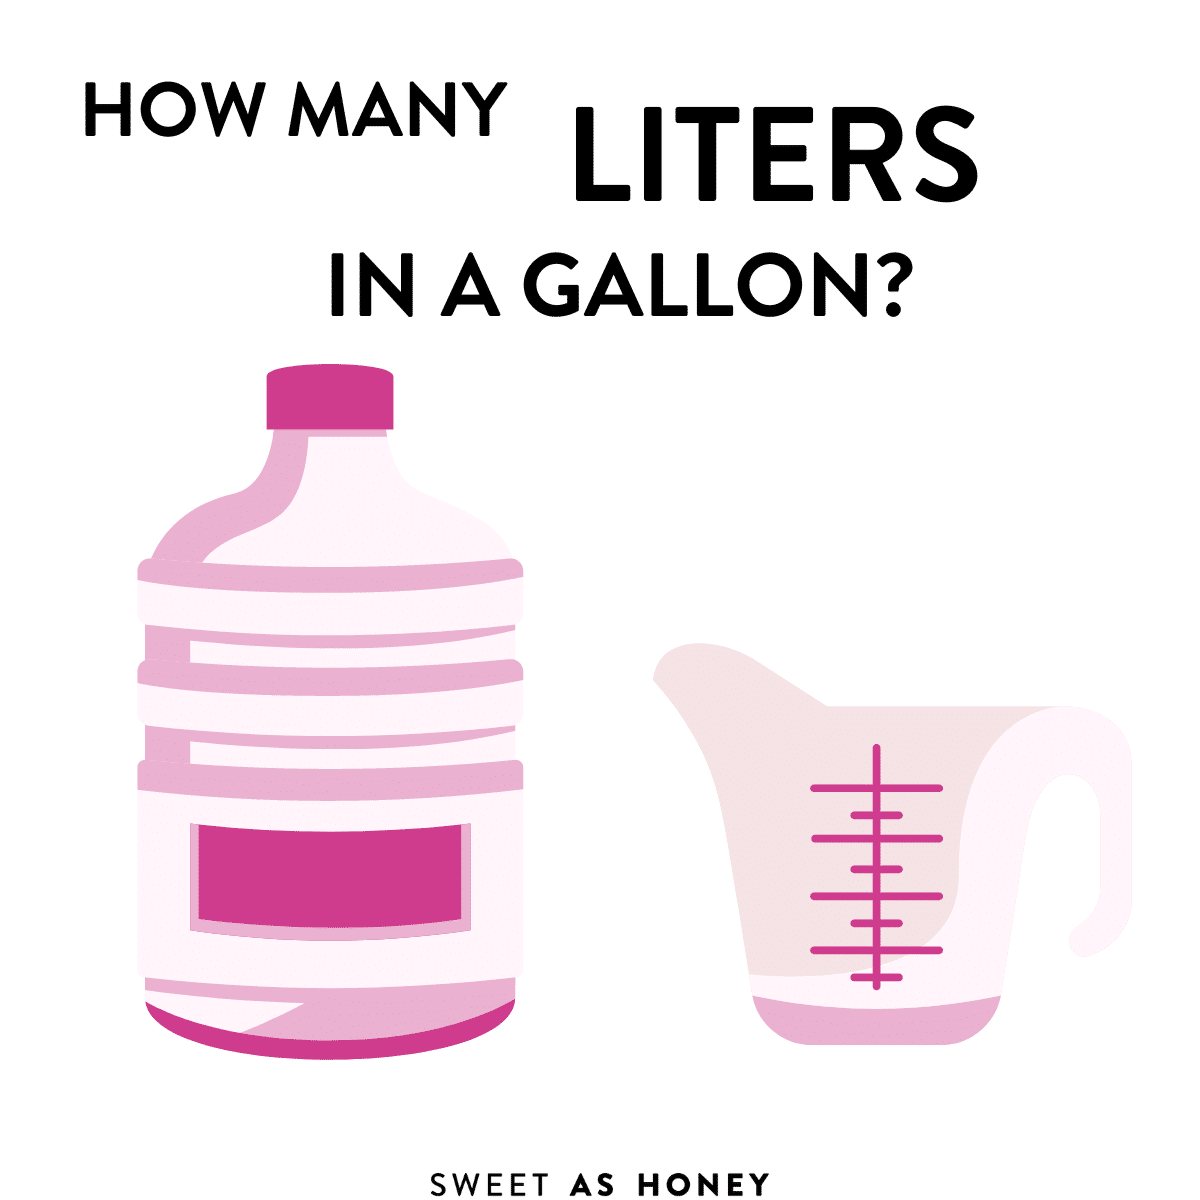 How Many Liters In A Gallon?